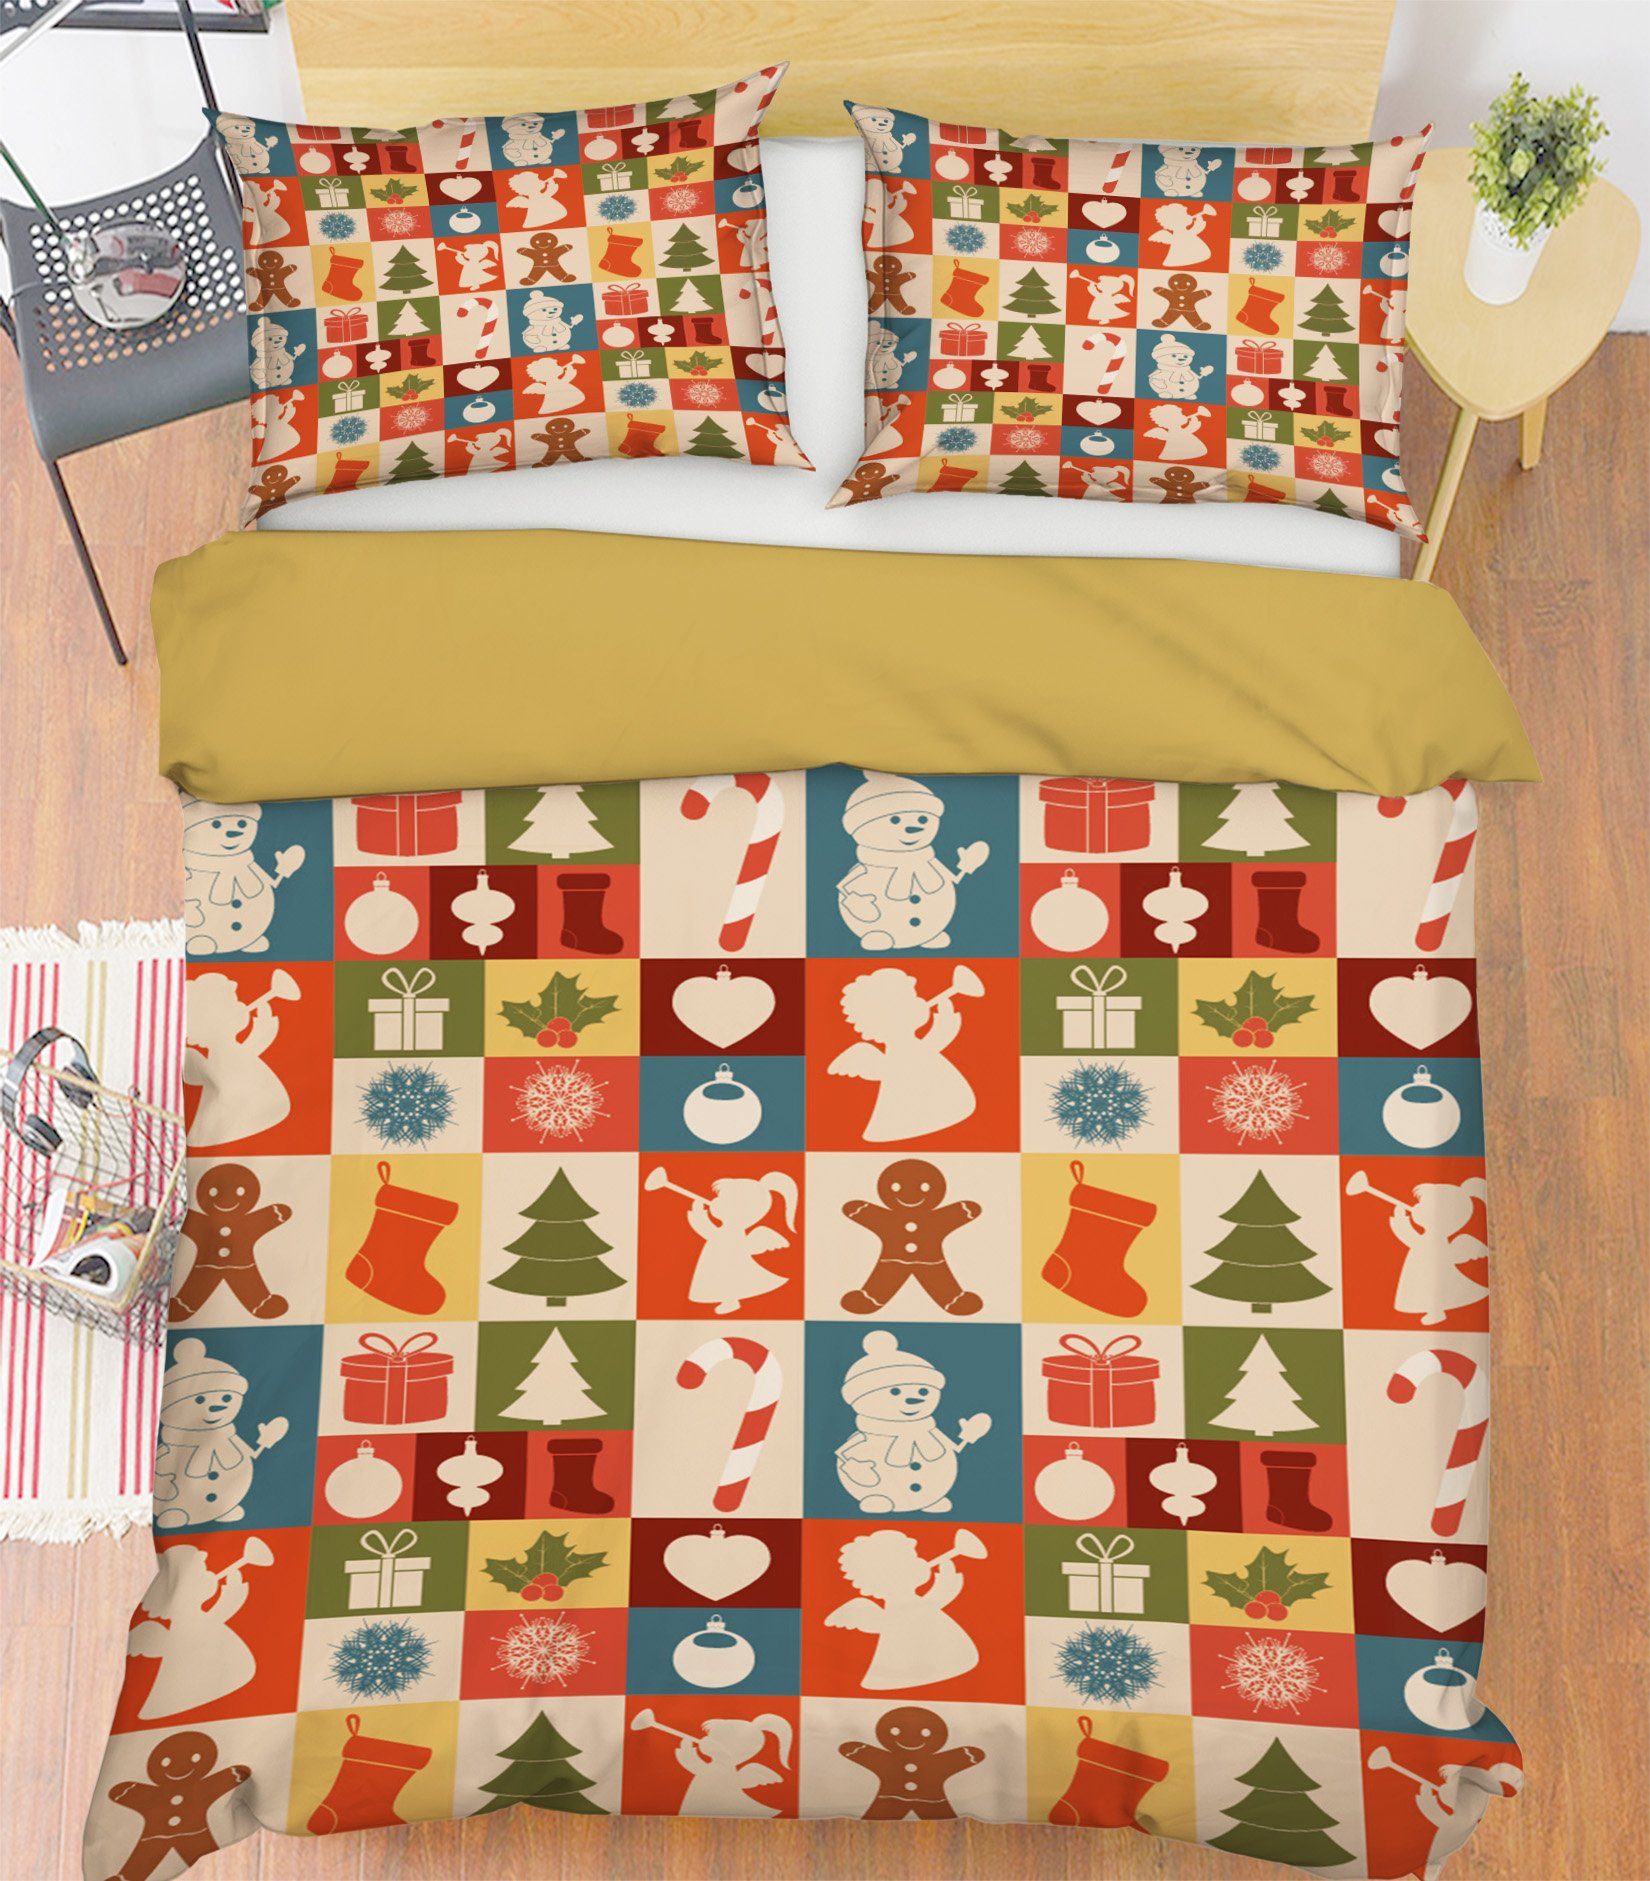 3D Christmas Plaid Pattern 31 Bed Pillowcases Quilt Quiet Covers AJ Creativity Home 